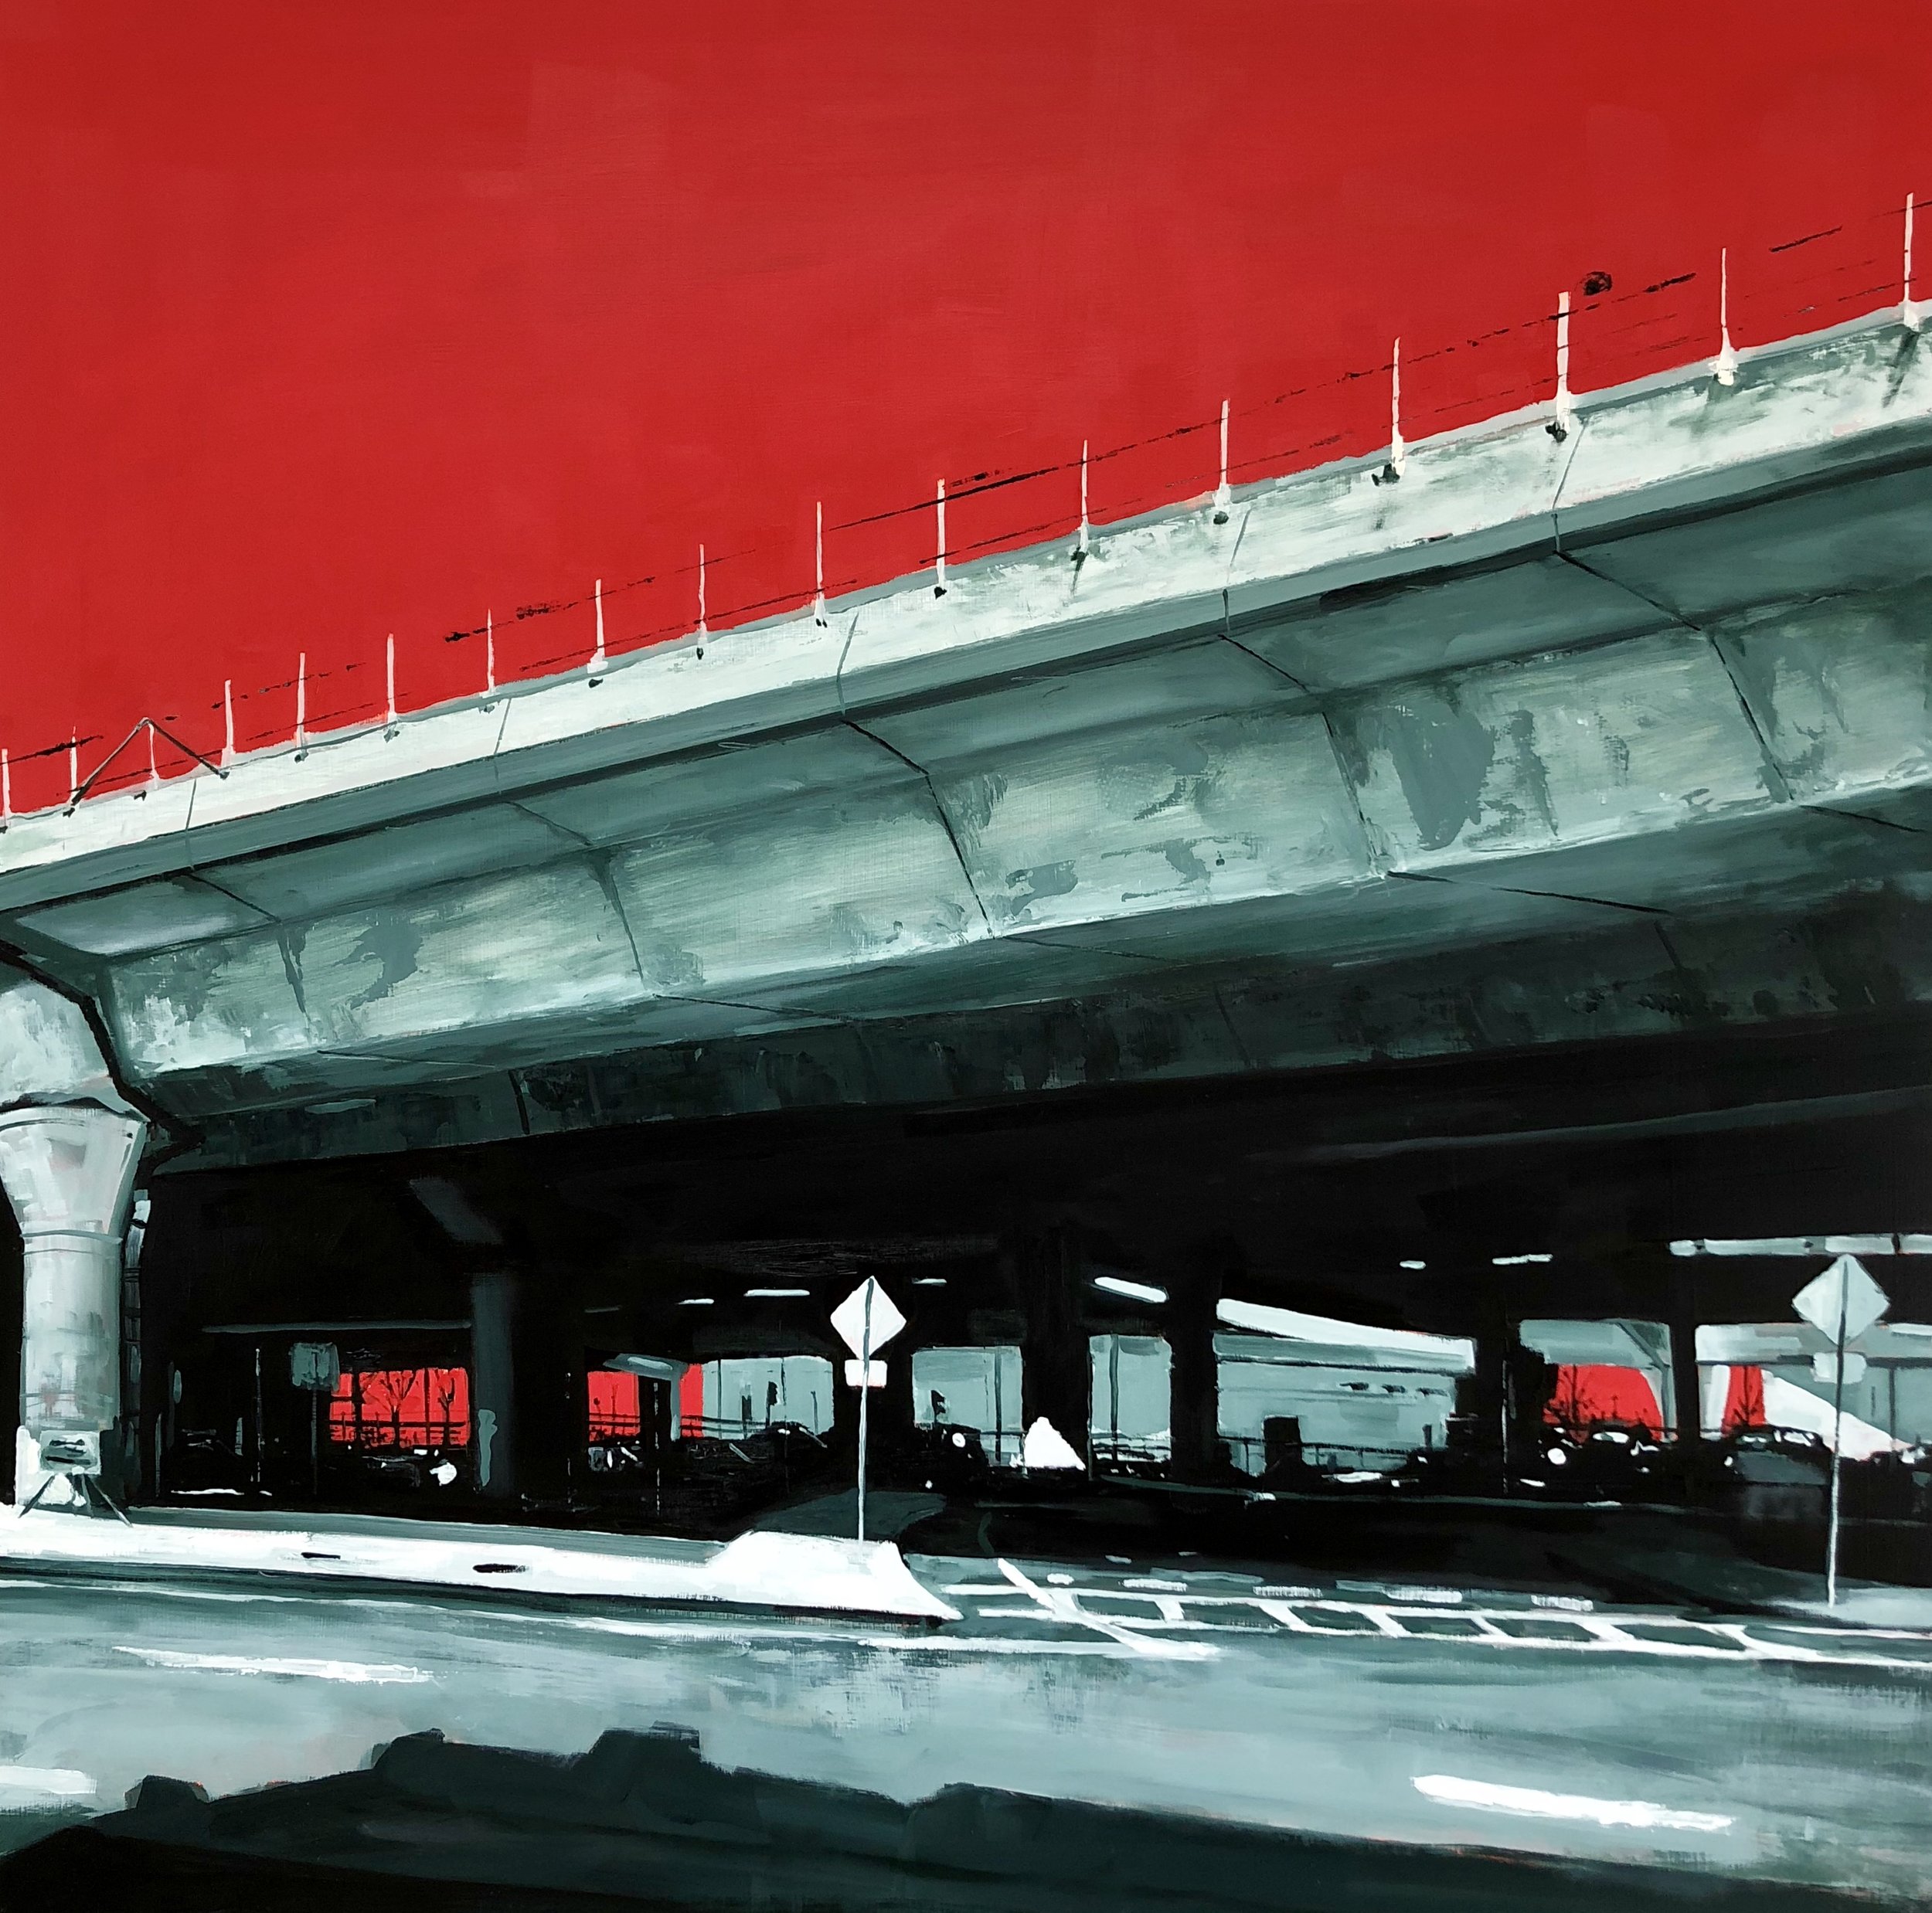  Chris Plunkett,  “Albany St. Overpass Red Sky”   Oil on cradled wood panel, 30 x 30 inches 